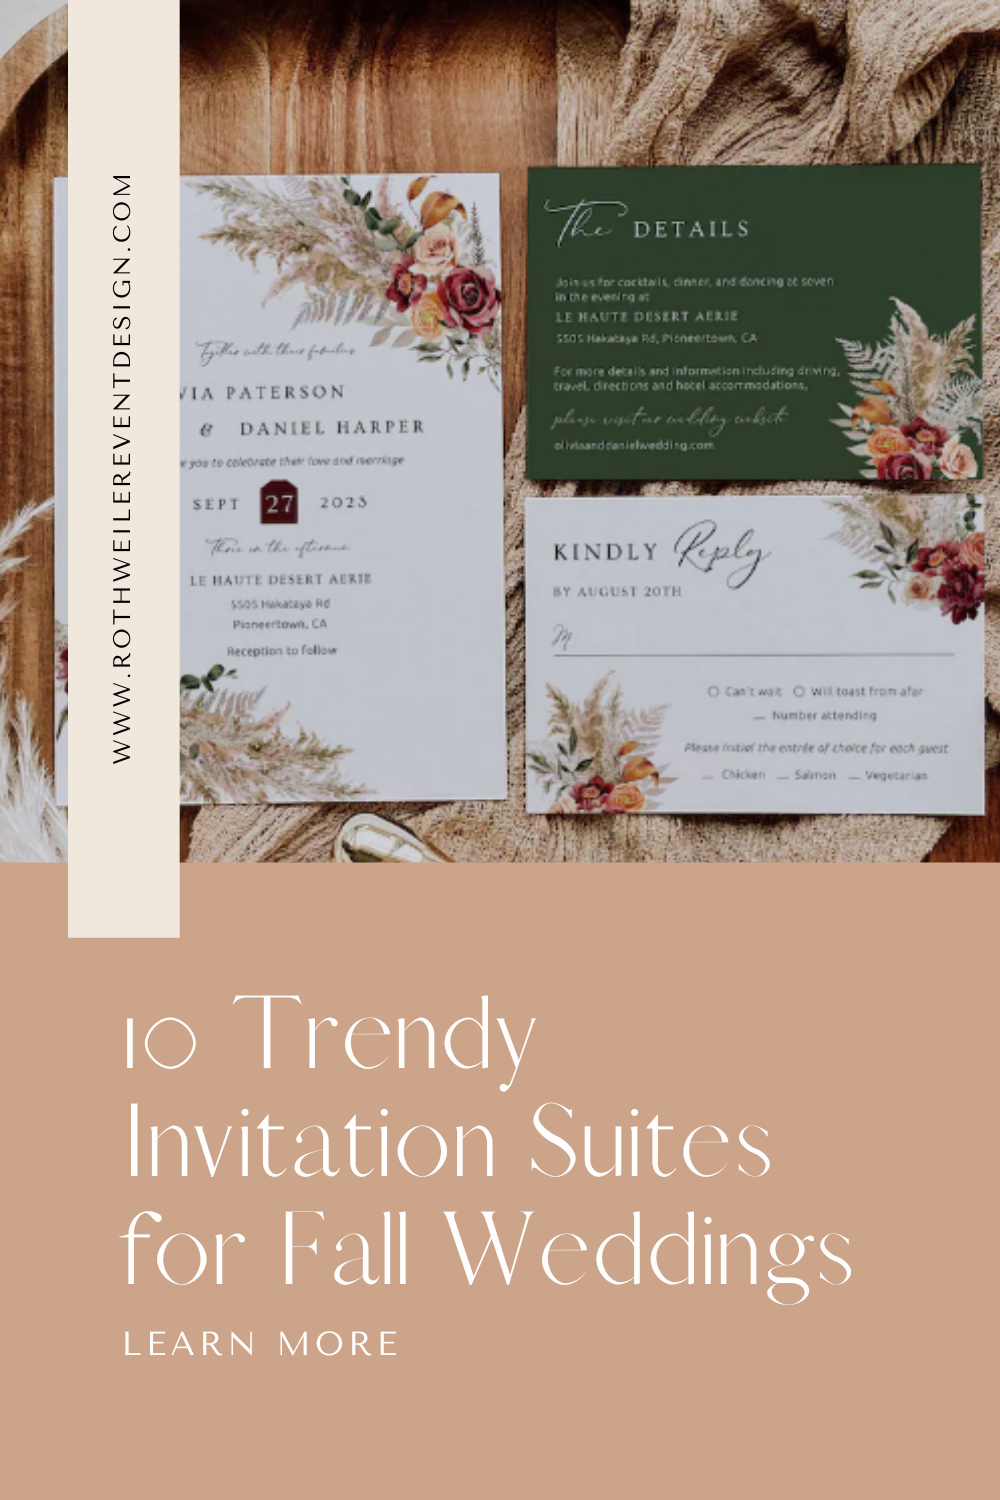 Blog cover for fall wedding invitations